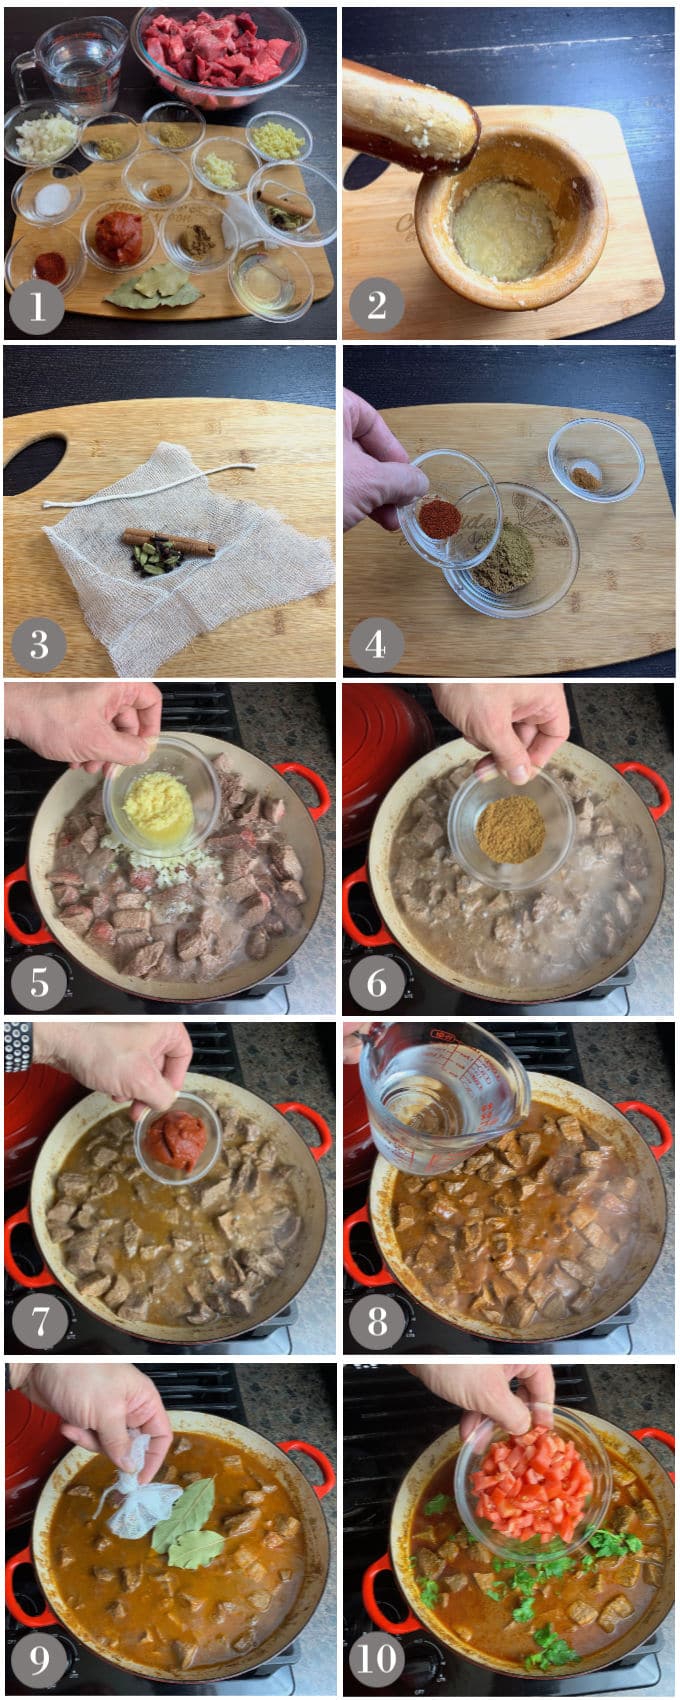 A collage of photos showing the ingredients and steps to make lamb rogan josh in a red pan on a stove.